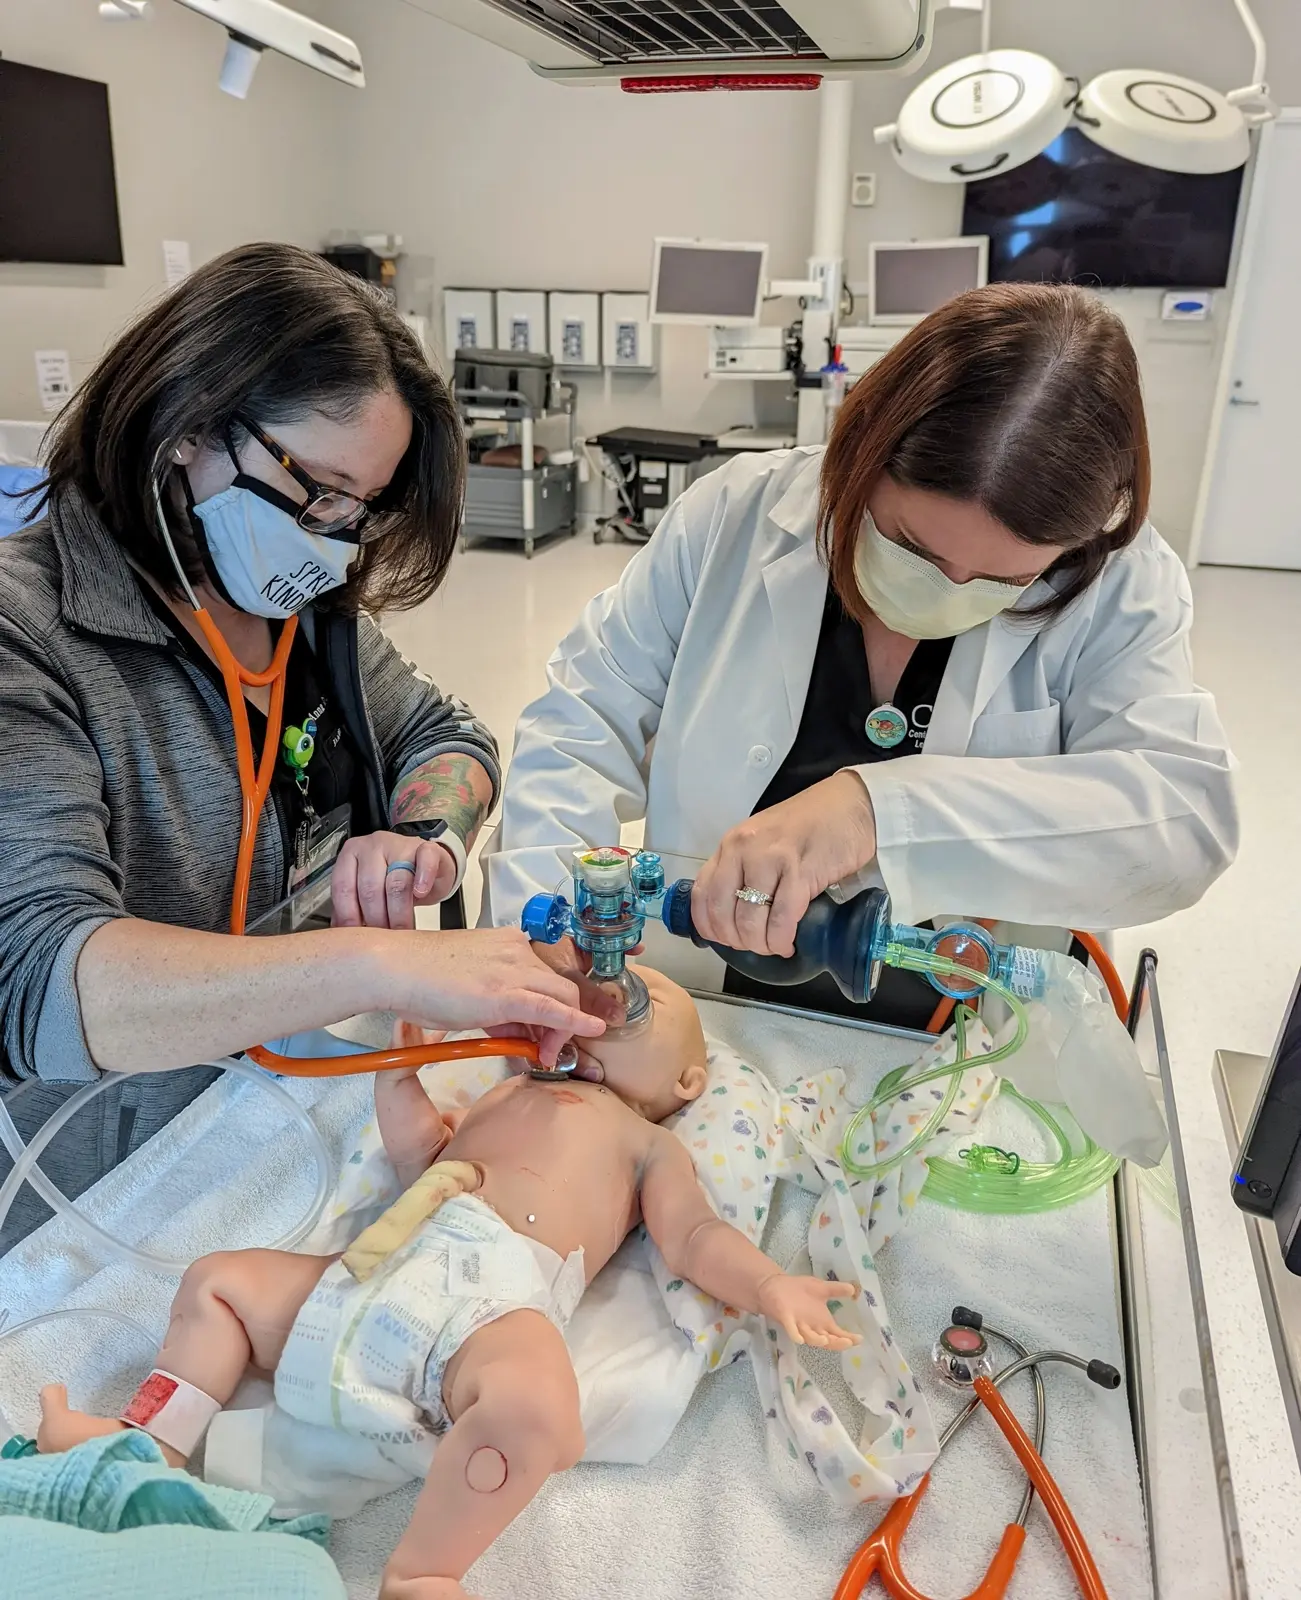 CAMLS Two healthcare professionals, wearing masks and gloves, are attending to a medical training mannequin of a baby. One is performing ventilation with a bag valve mask while the other assists, in a clinical setting with various medical equipment in the background.